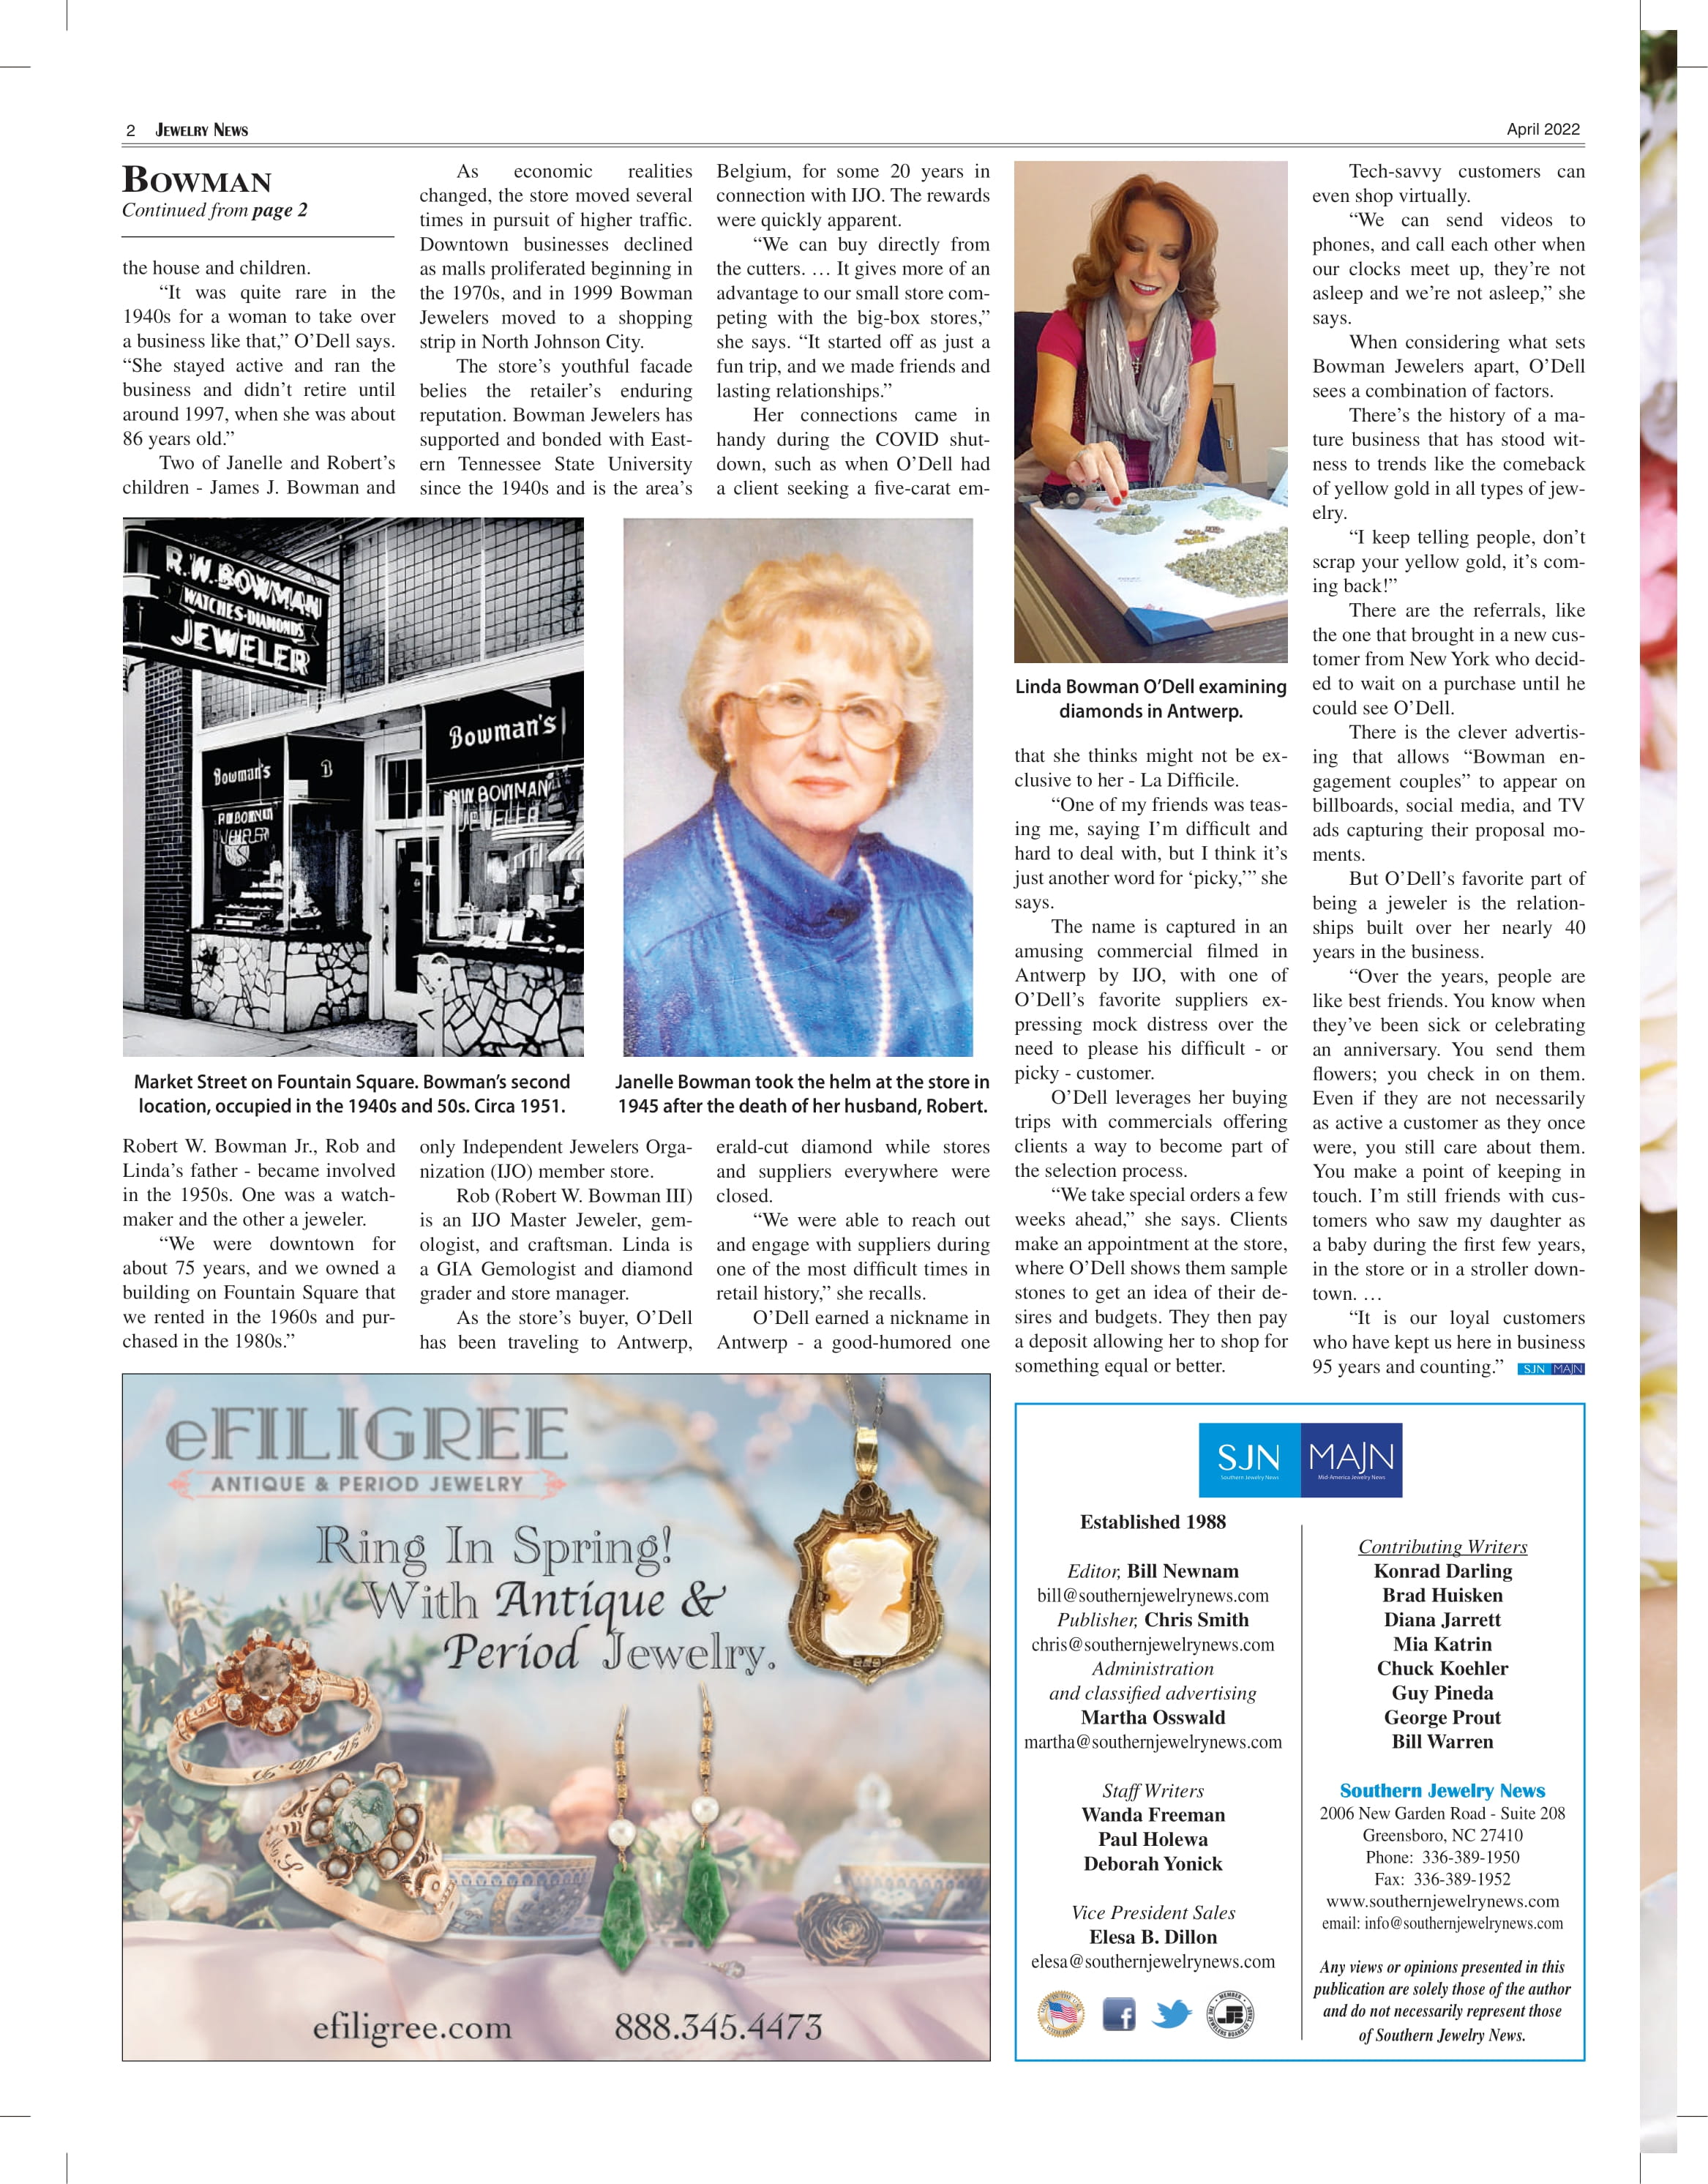 Bowman Jewelers in the news